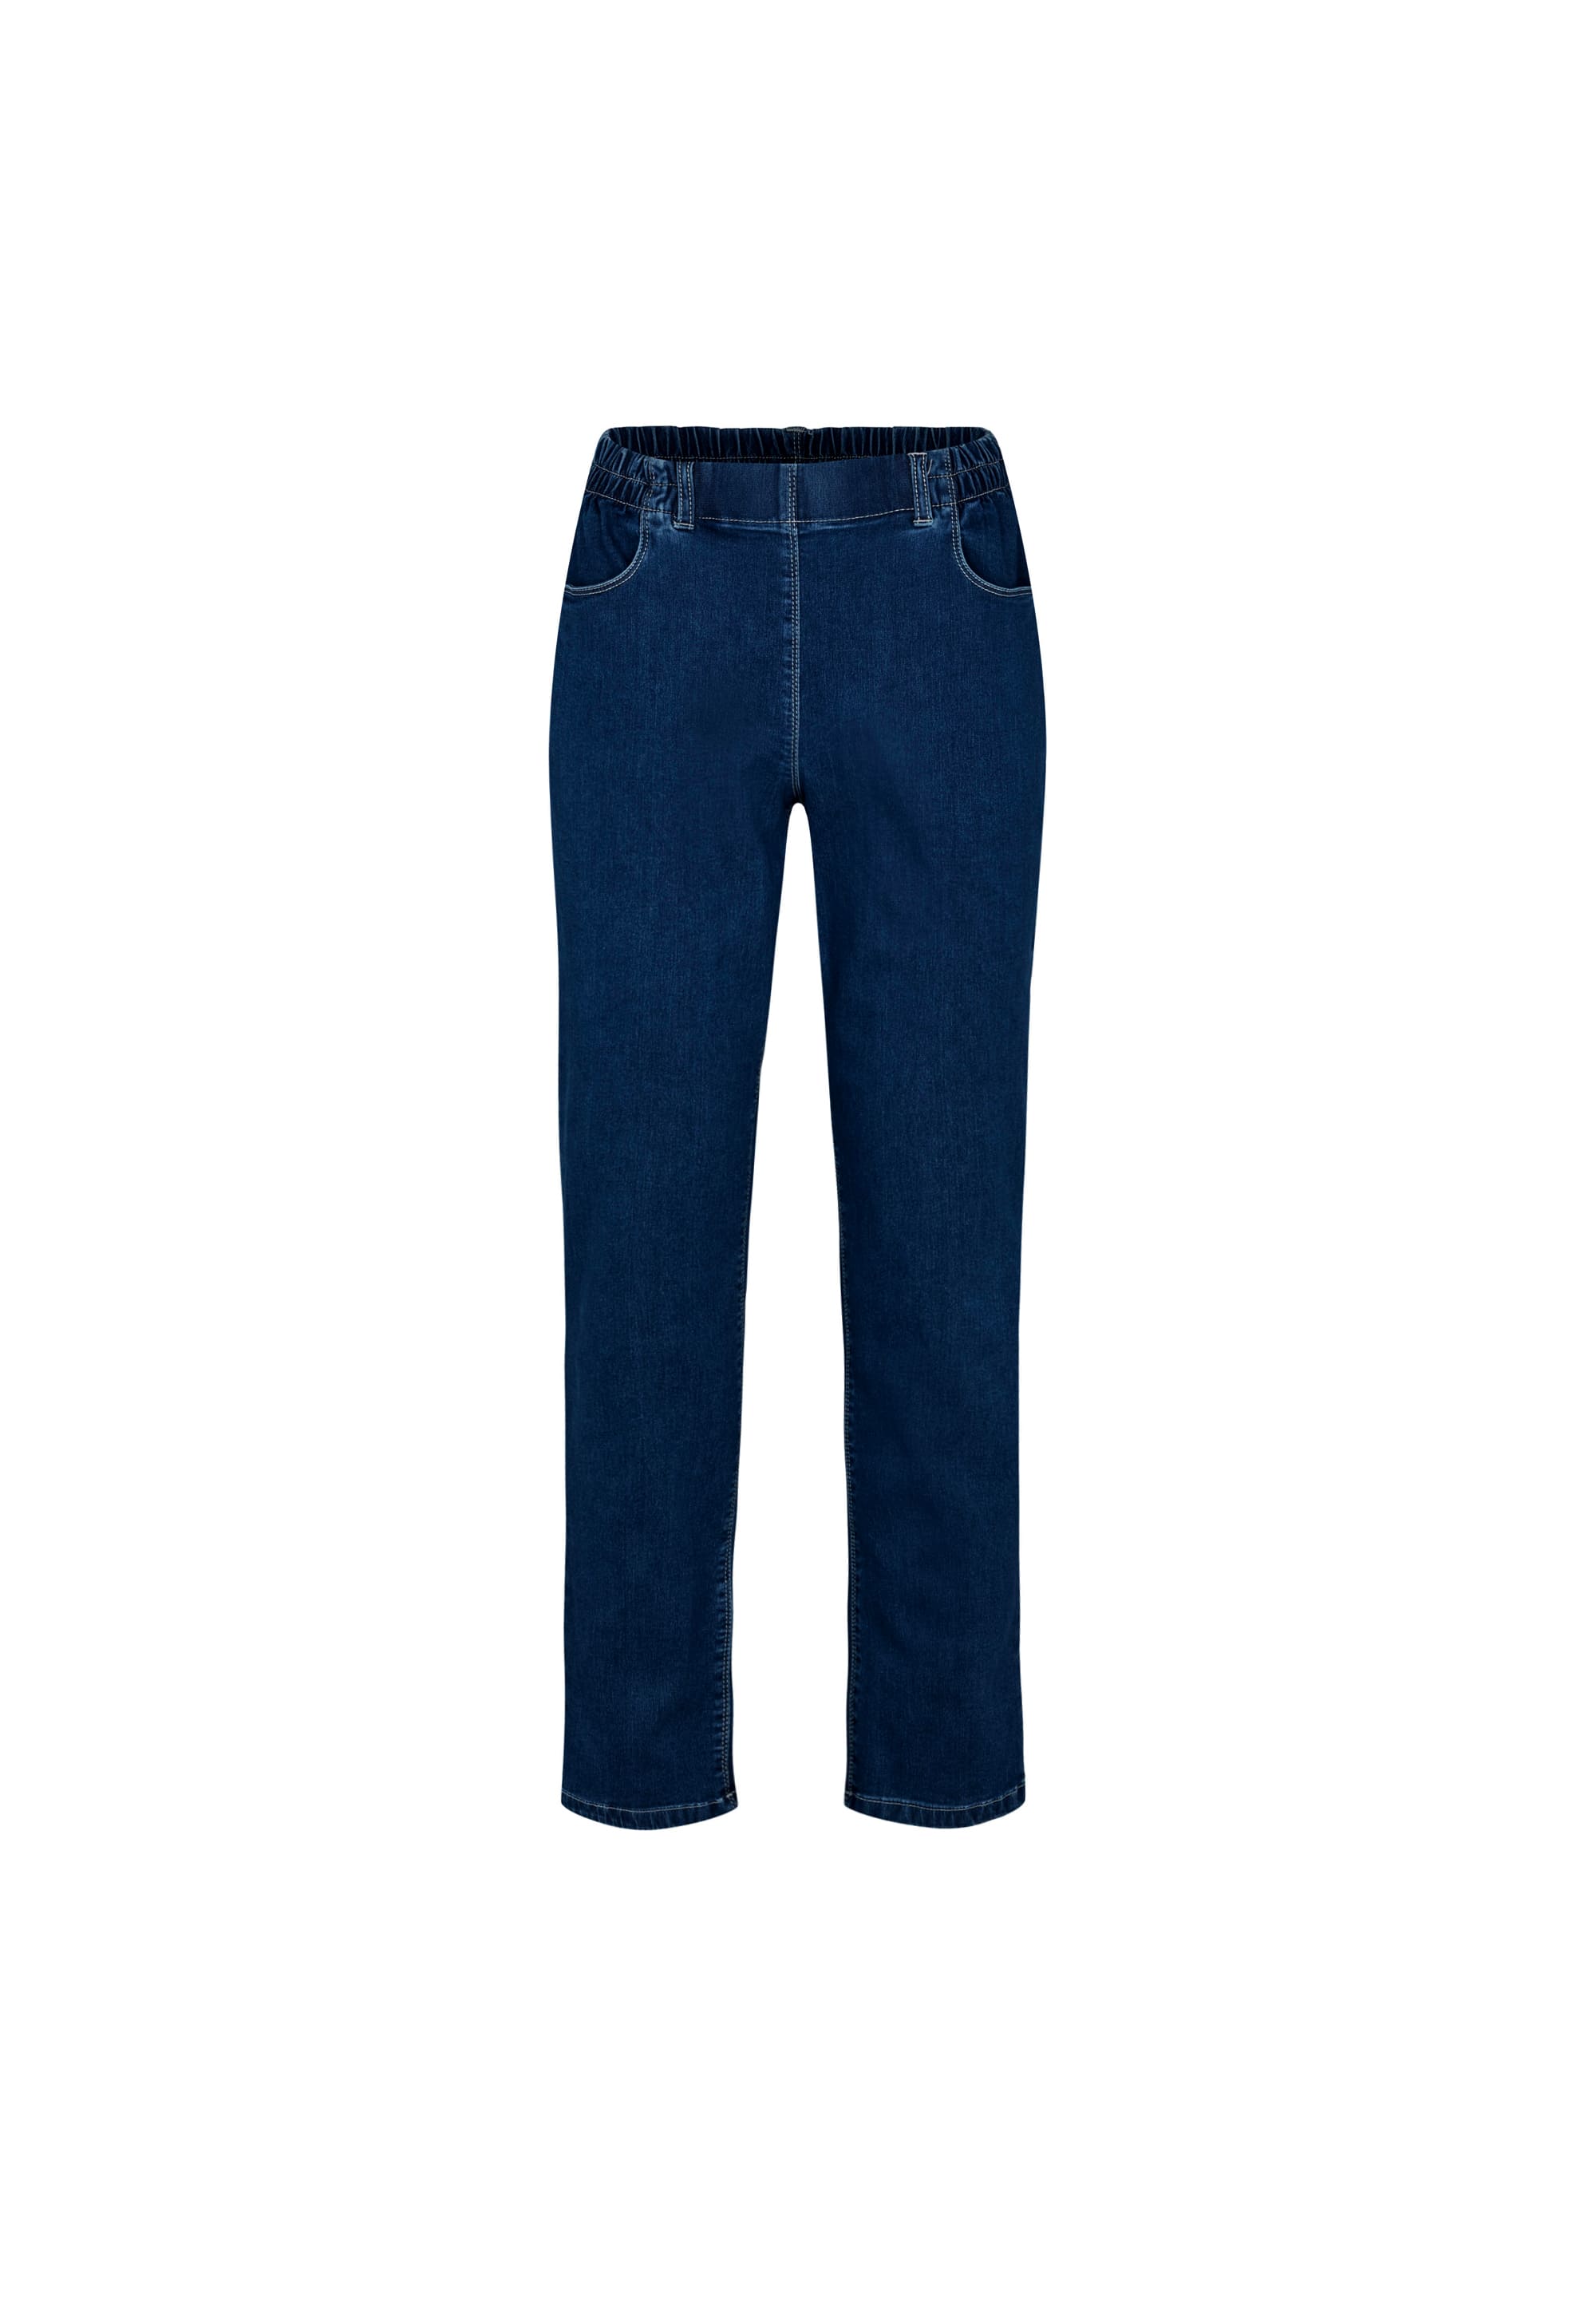 LAURIE Violet Relaxed - Medium Length Trousers RELAXED 49501 Dark Blue Denim